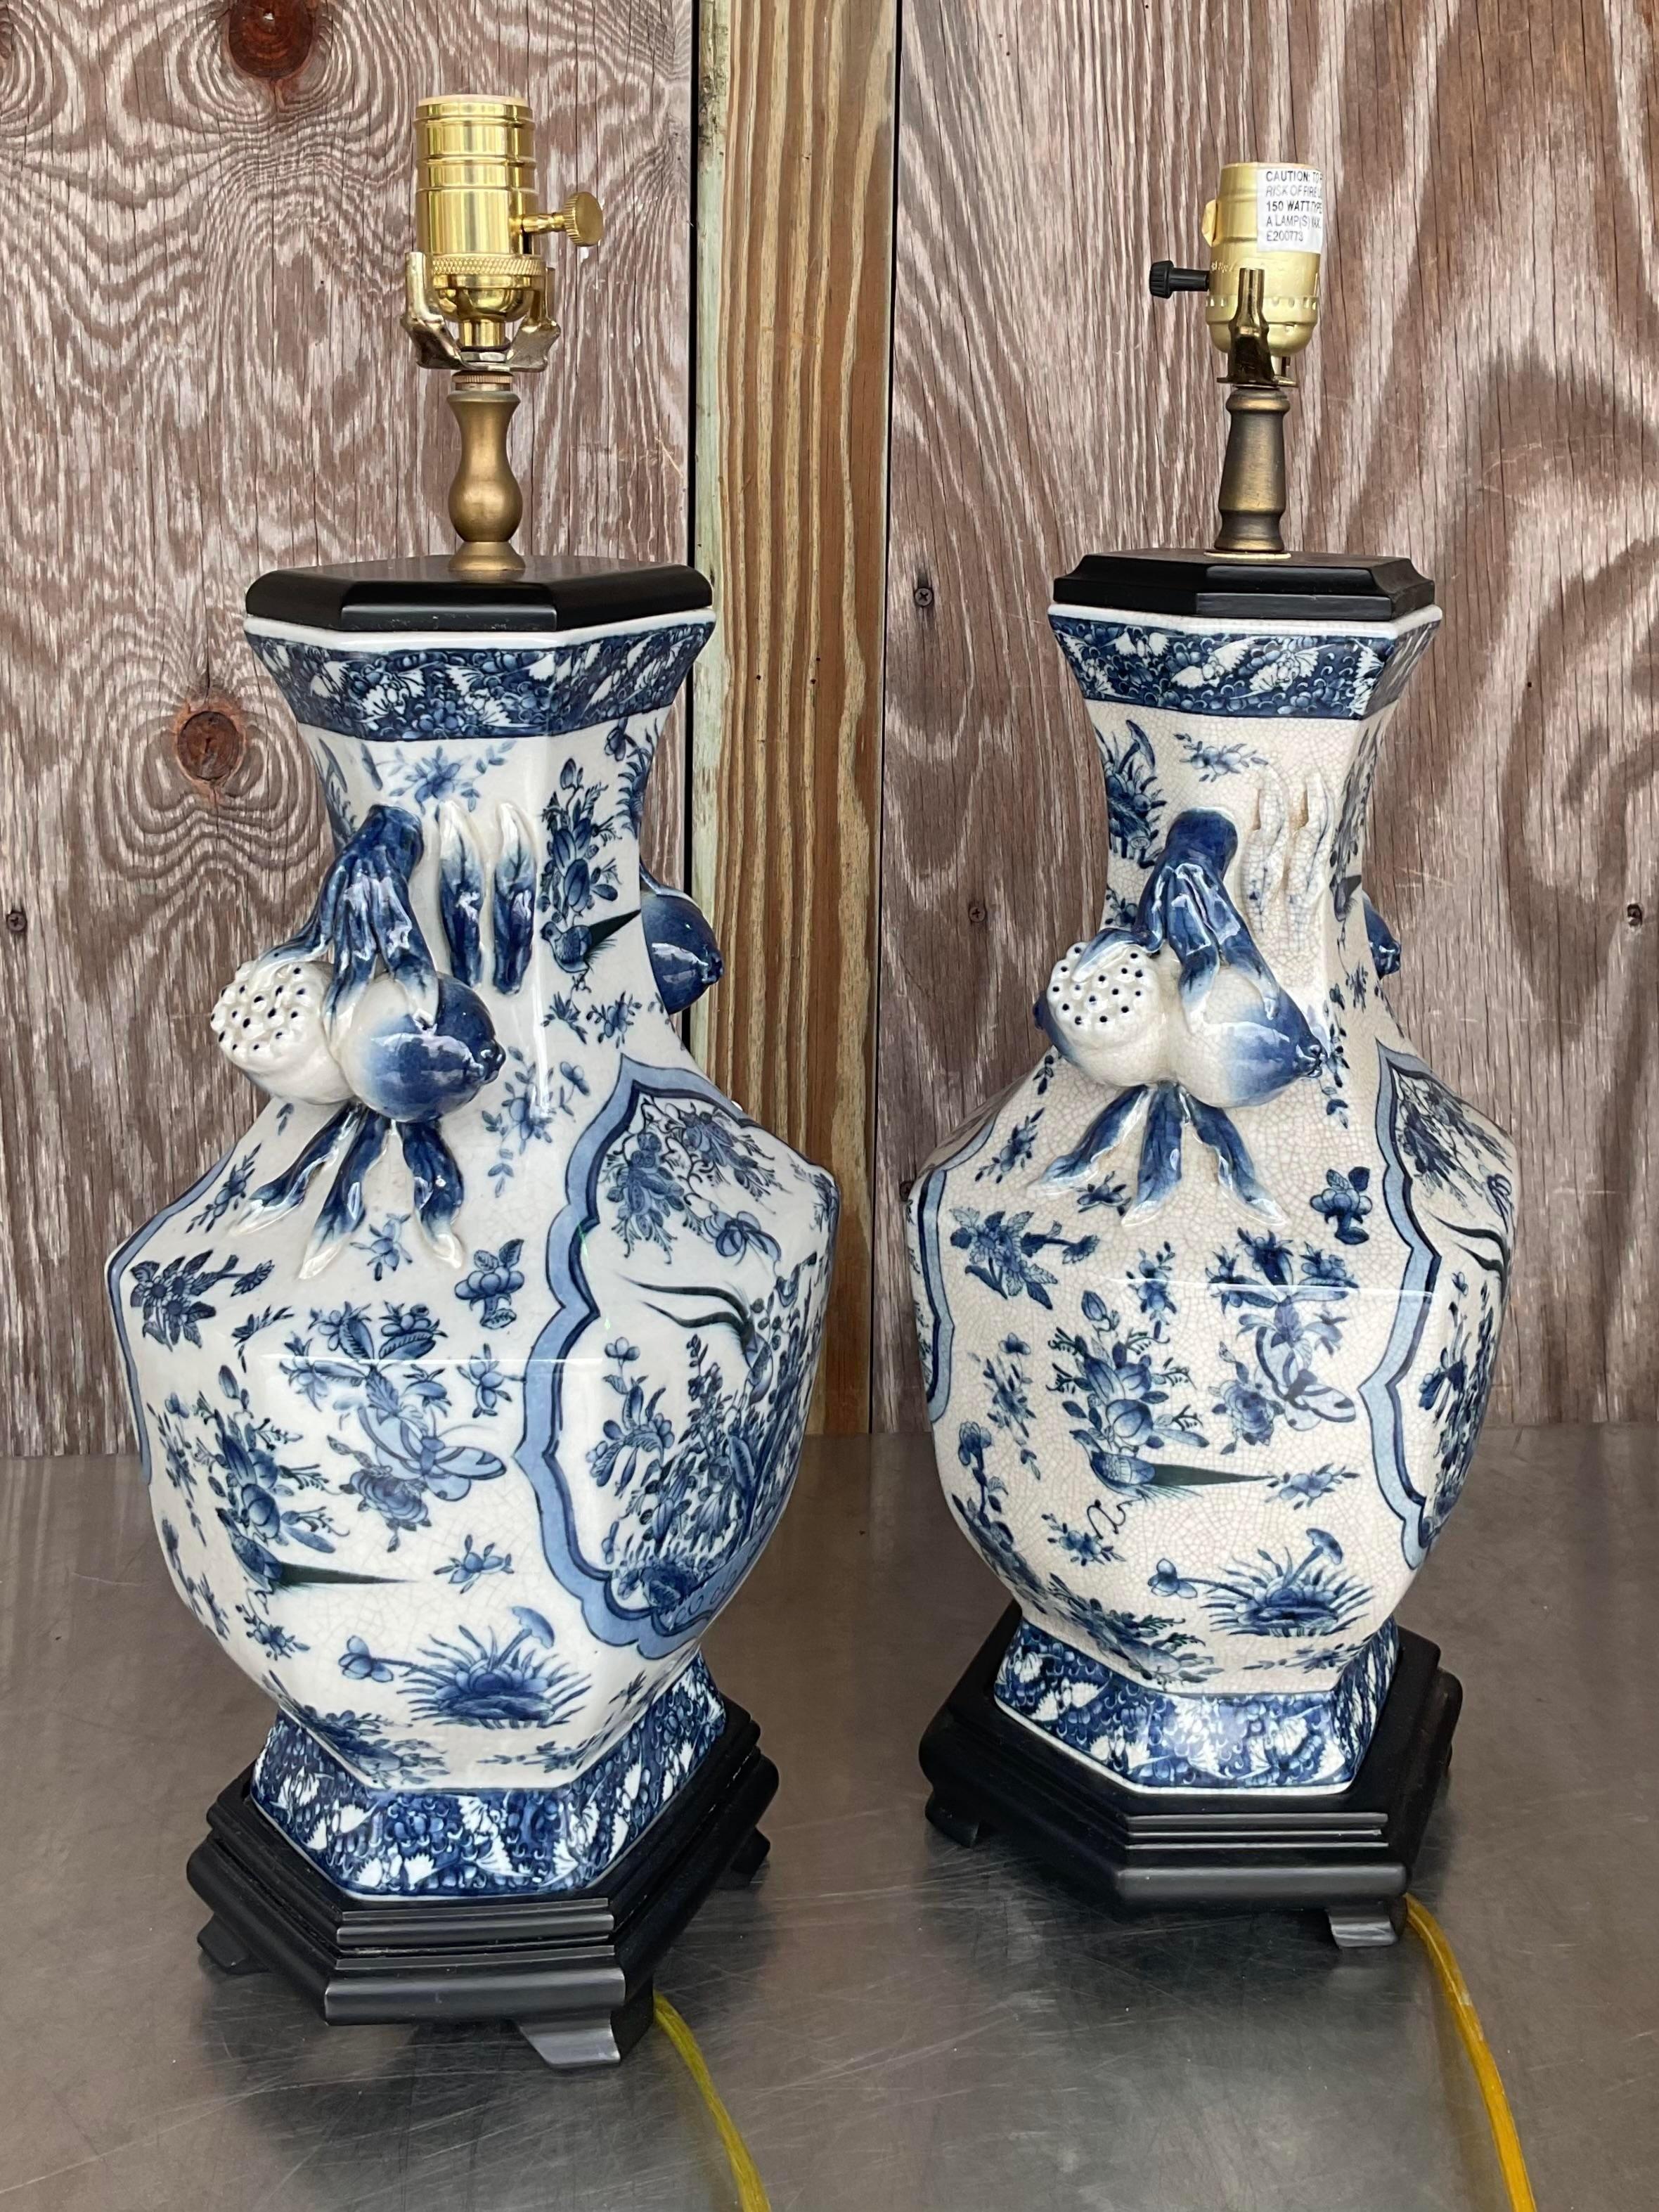 American Vintage Asian Chinoiserie Ceramic Lamps - a Pair For Sale